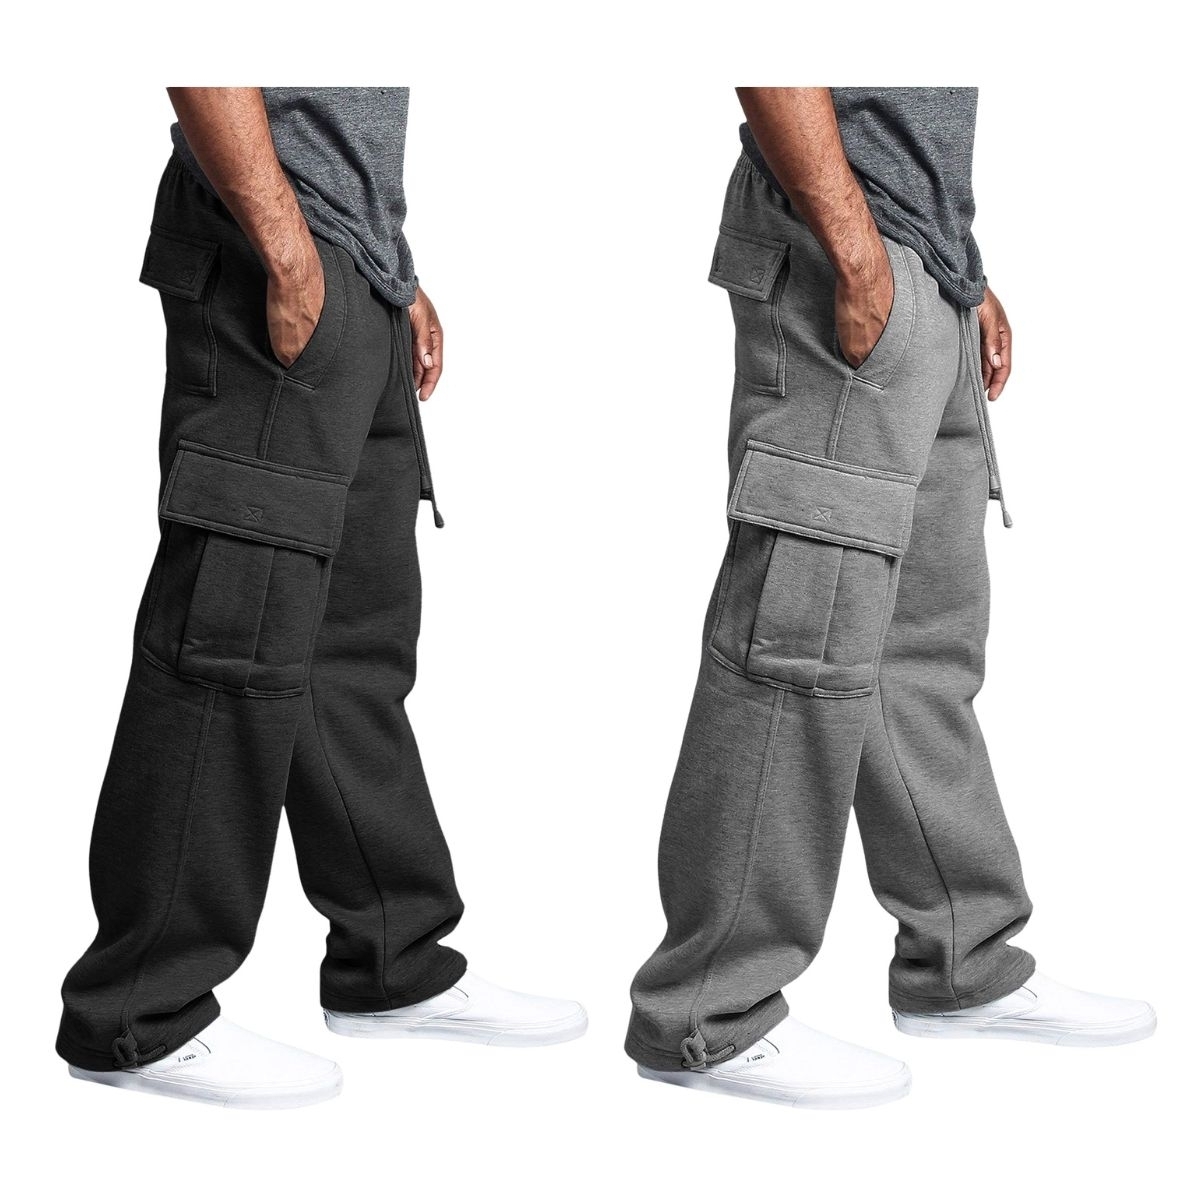 2-Pack: Men's Casual Solid Fleece Lined Cargo Jogger Soft Sweatpants With Pockets - Black&charcoal, Large